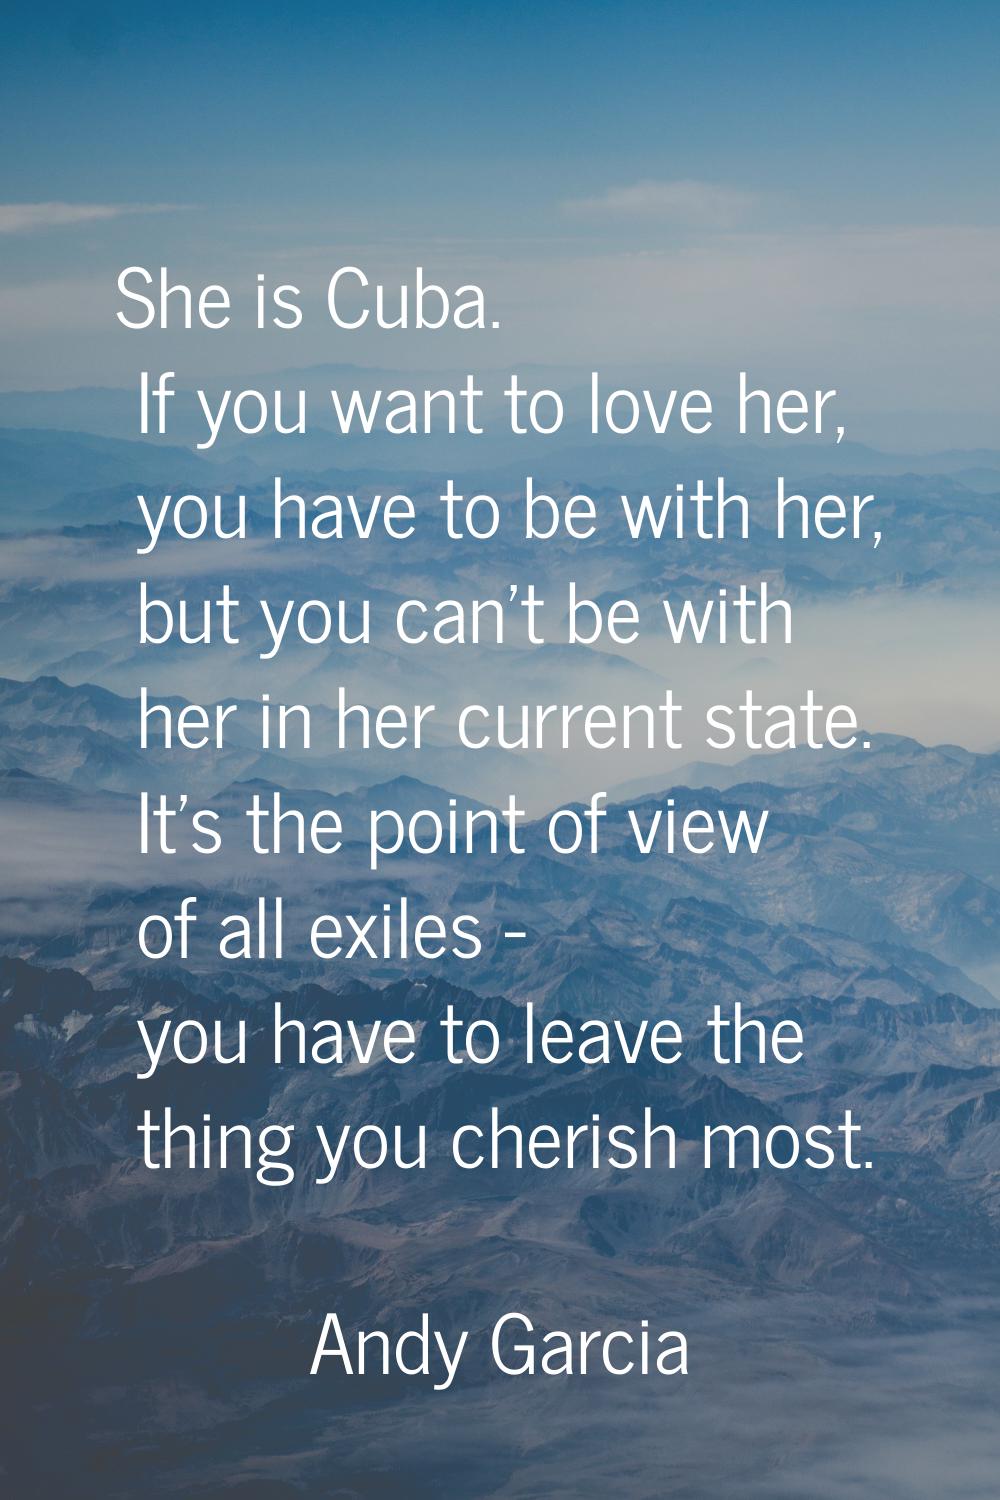 She is Cuba. If you want to love her, you have to be with her, but you can't be with her in her cur